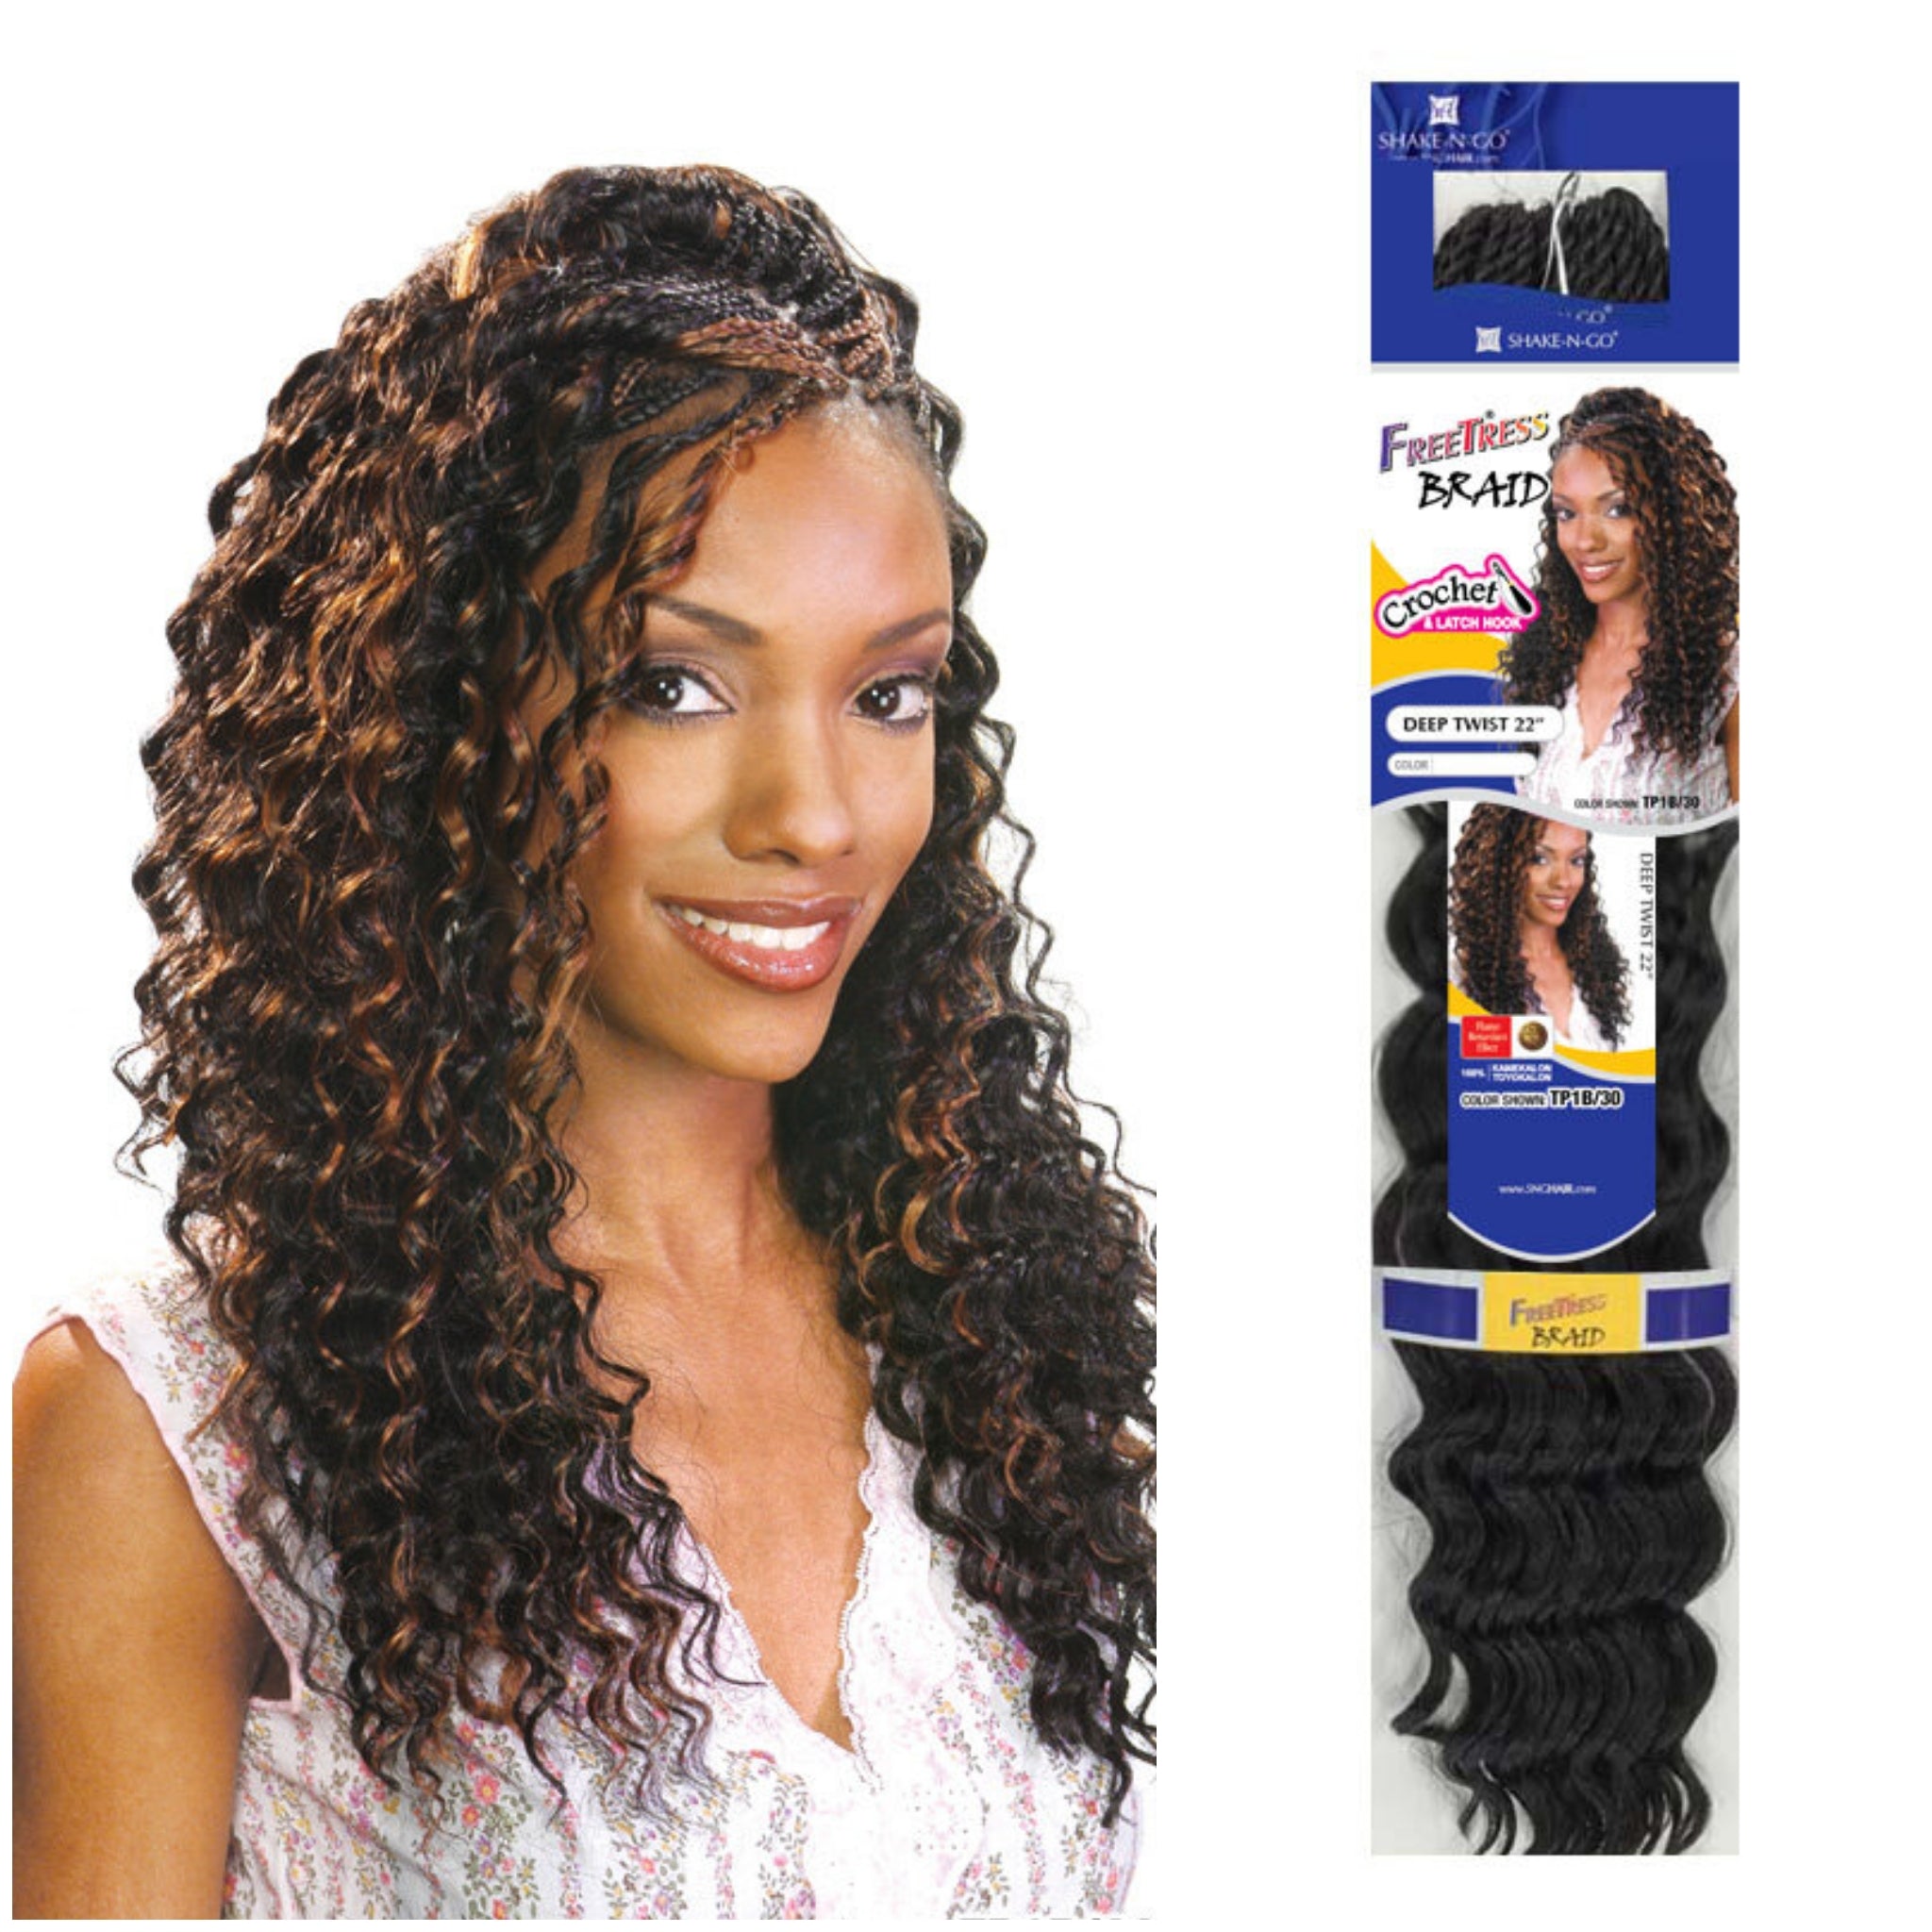 FREETRESS BRAID Hair Extensions Water Wave 22 crochet latch hook NEW Color  27